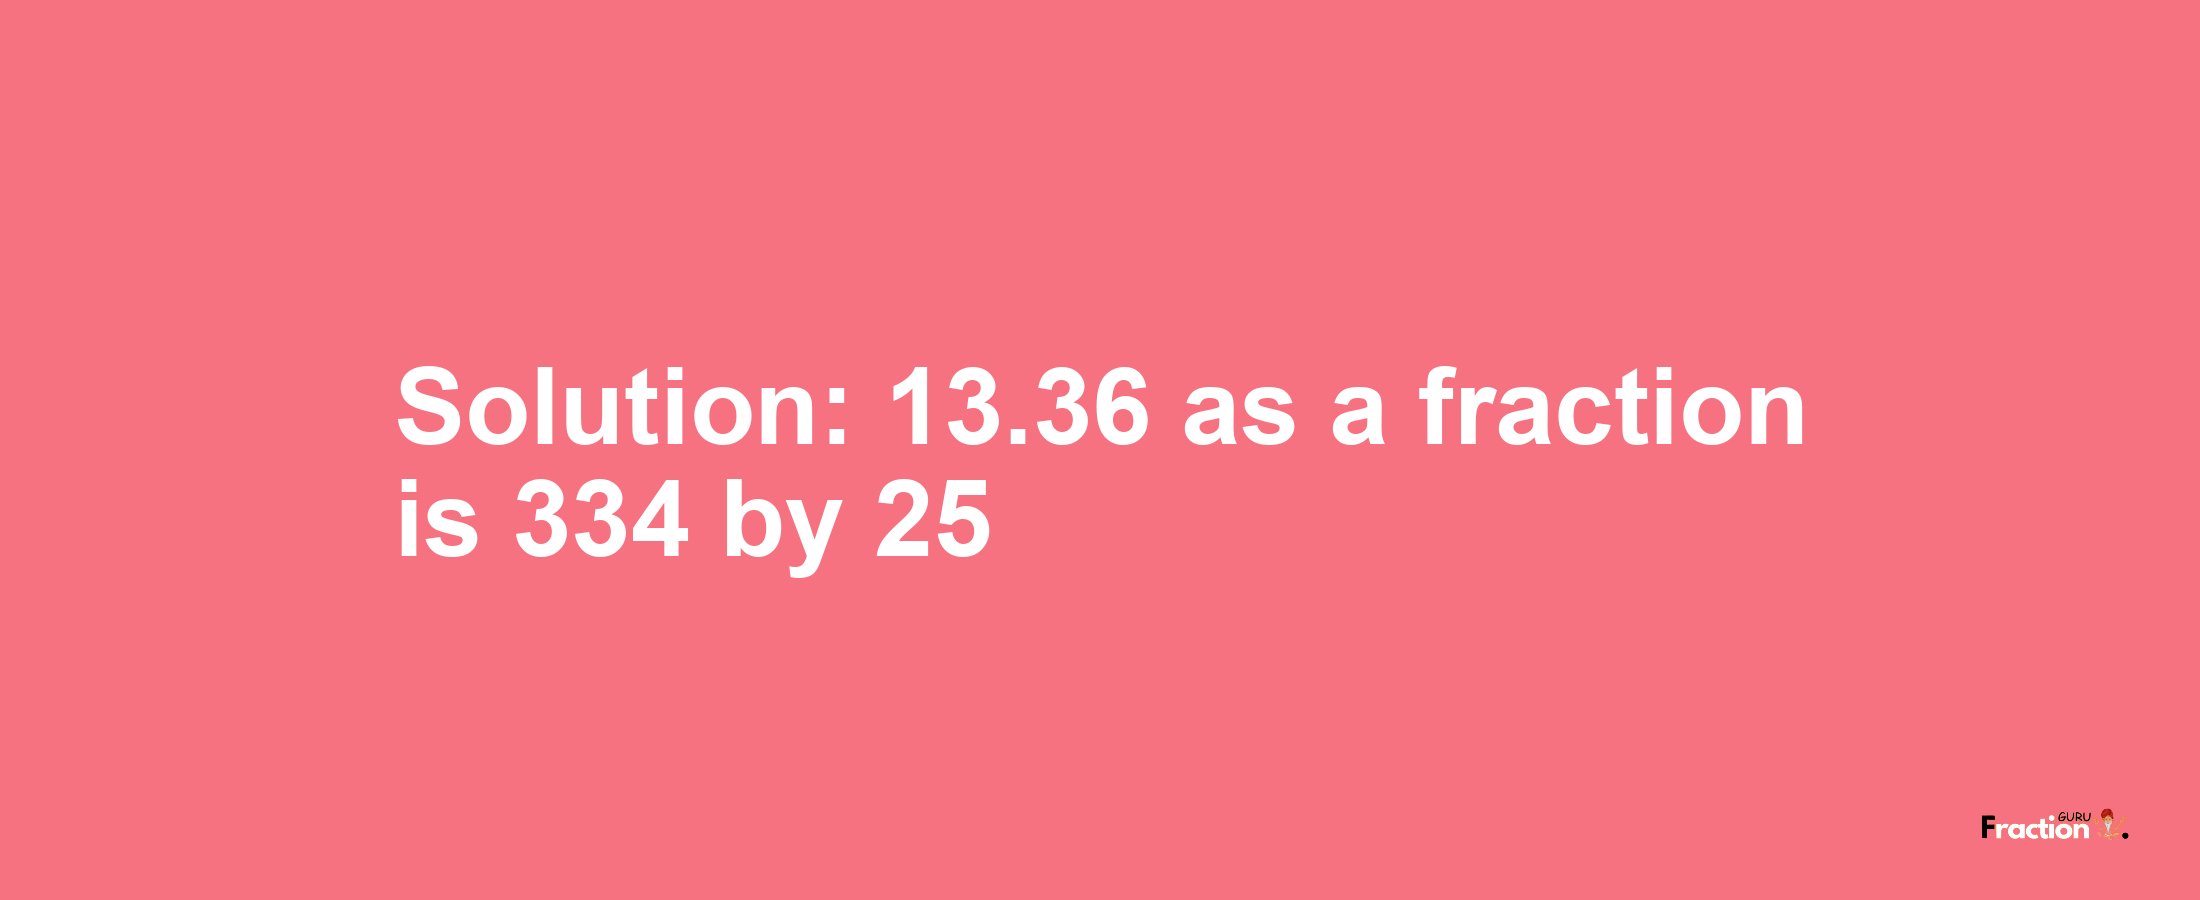 Solution:13.36 as a fraction is 334/25